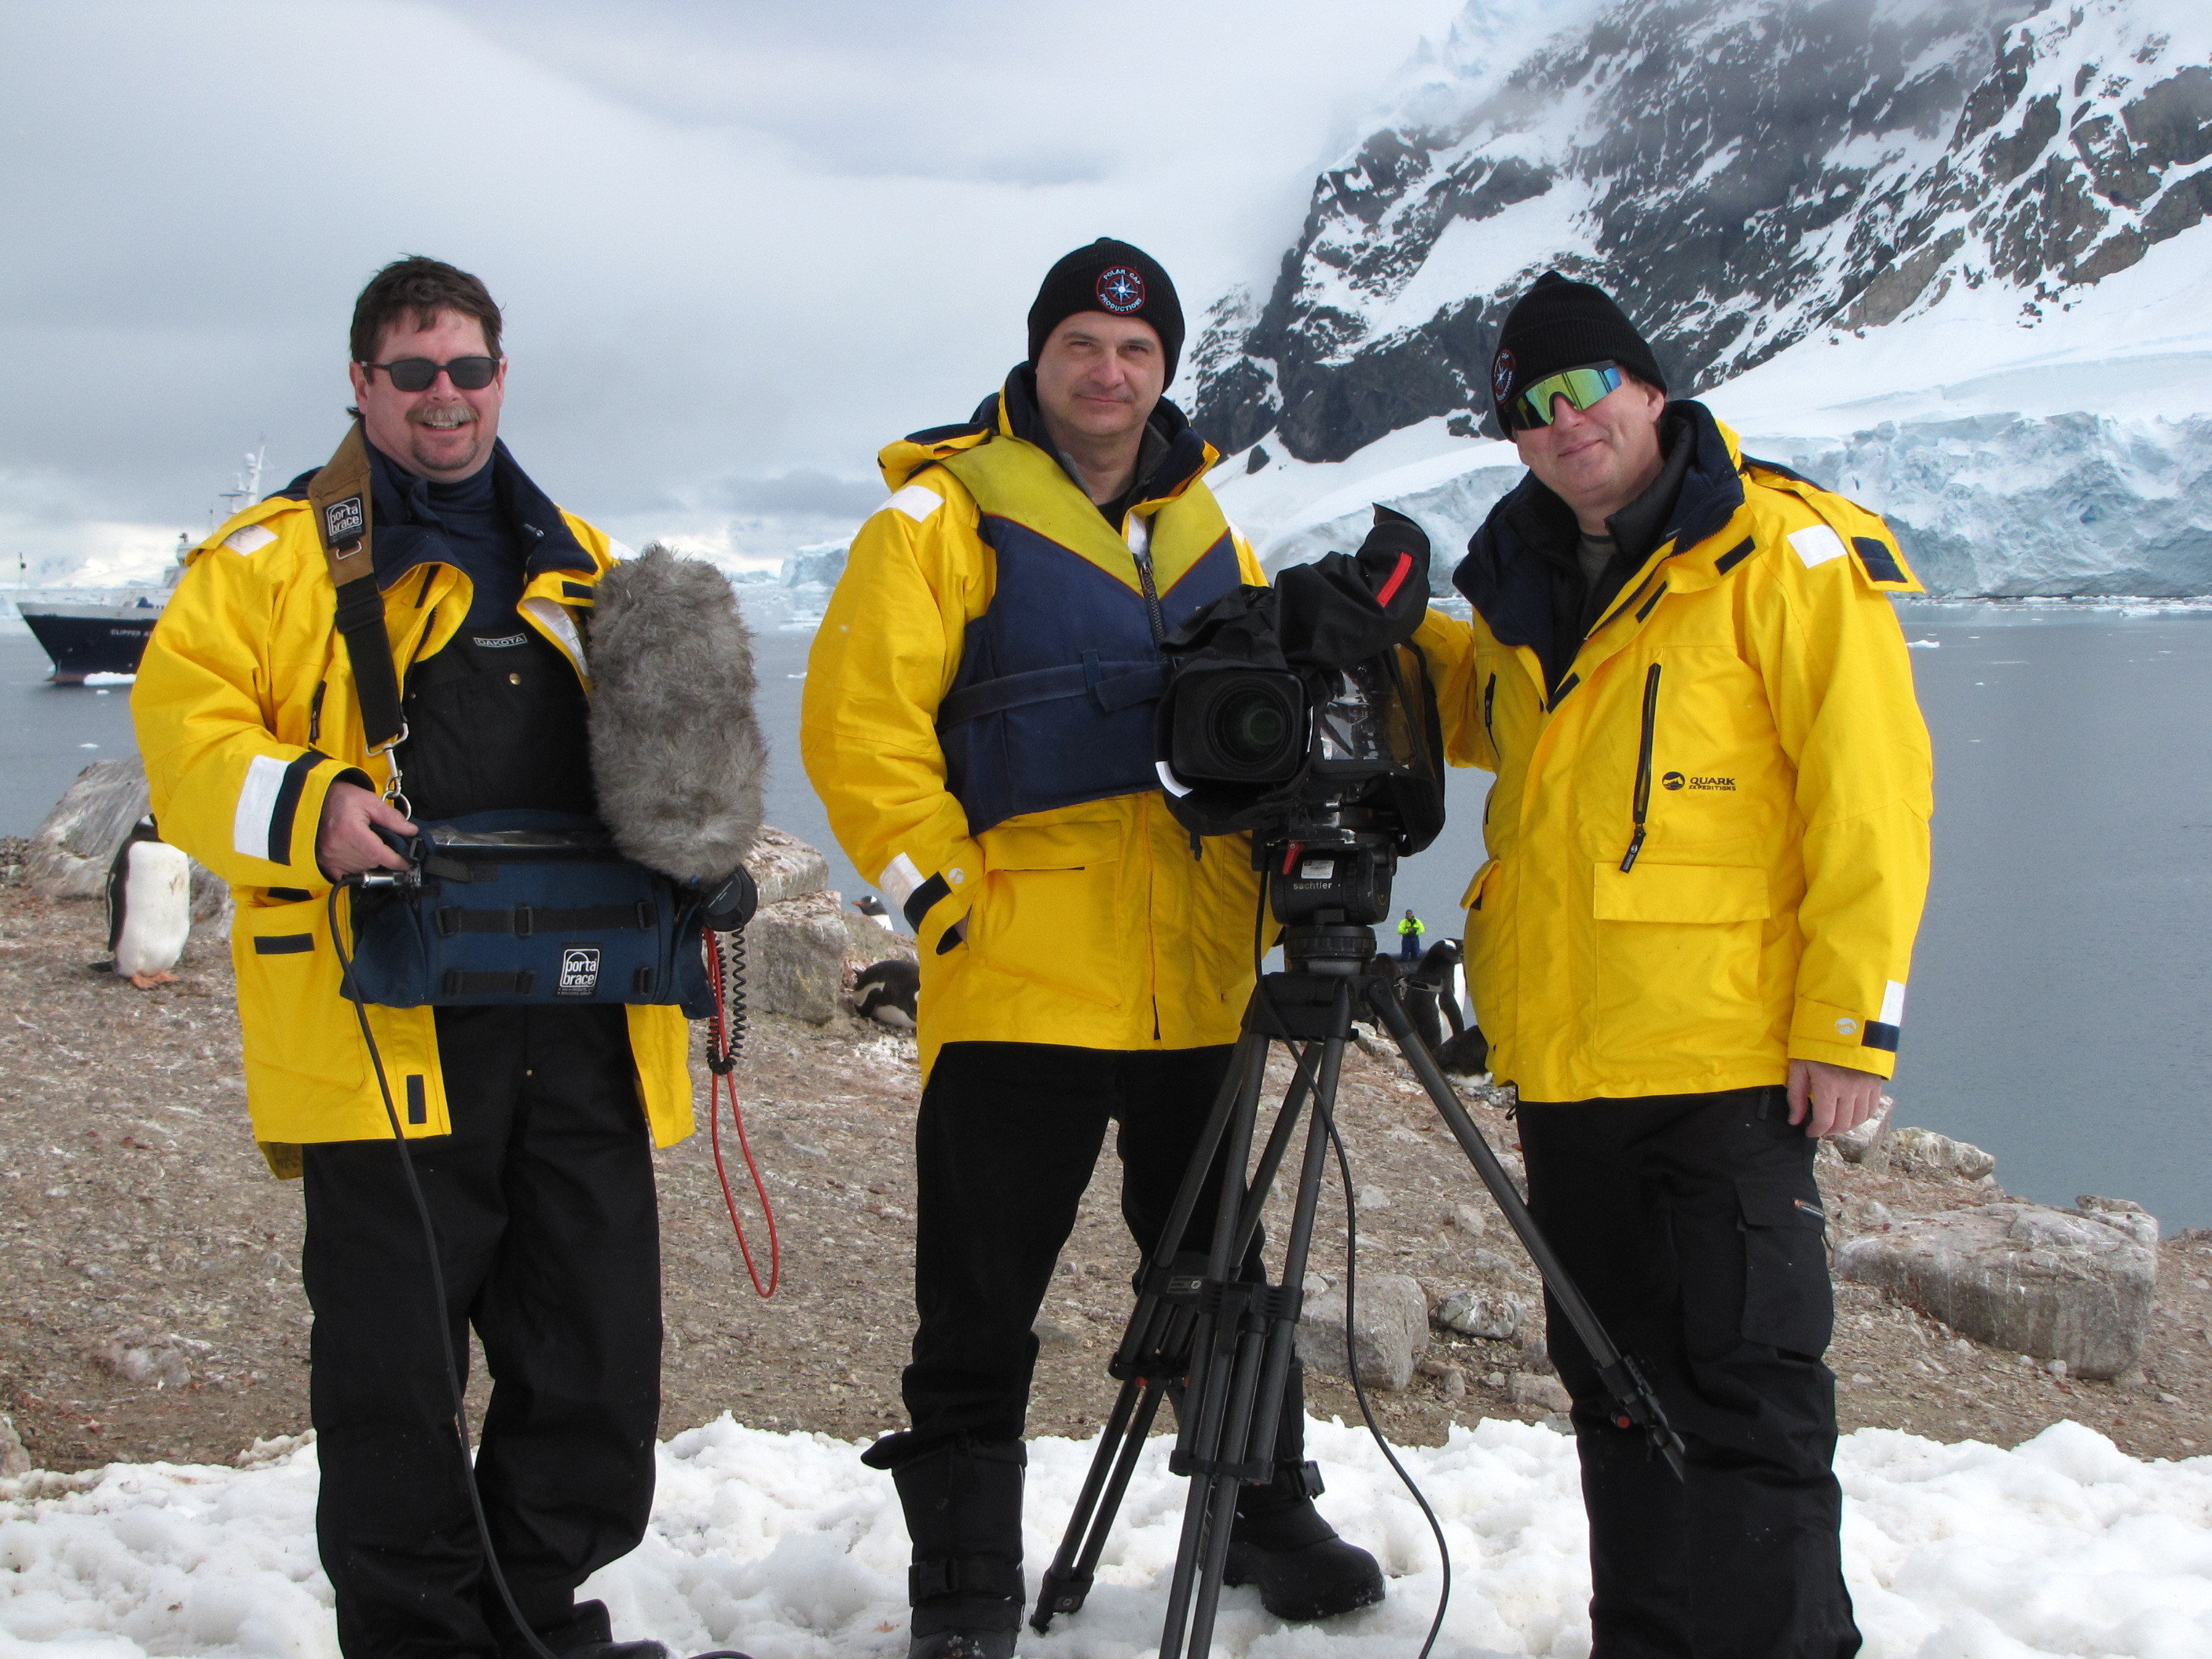 Production Team of The Antarctica Challenge in Neko Harbour, Antarctica. From left, Sound Recordist Stephen Bourne, Producer/Director Mark Terry, and Cinematographer, Damir Chytil, CSC.